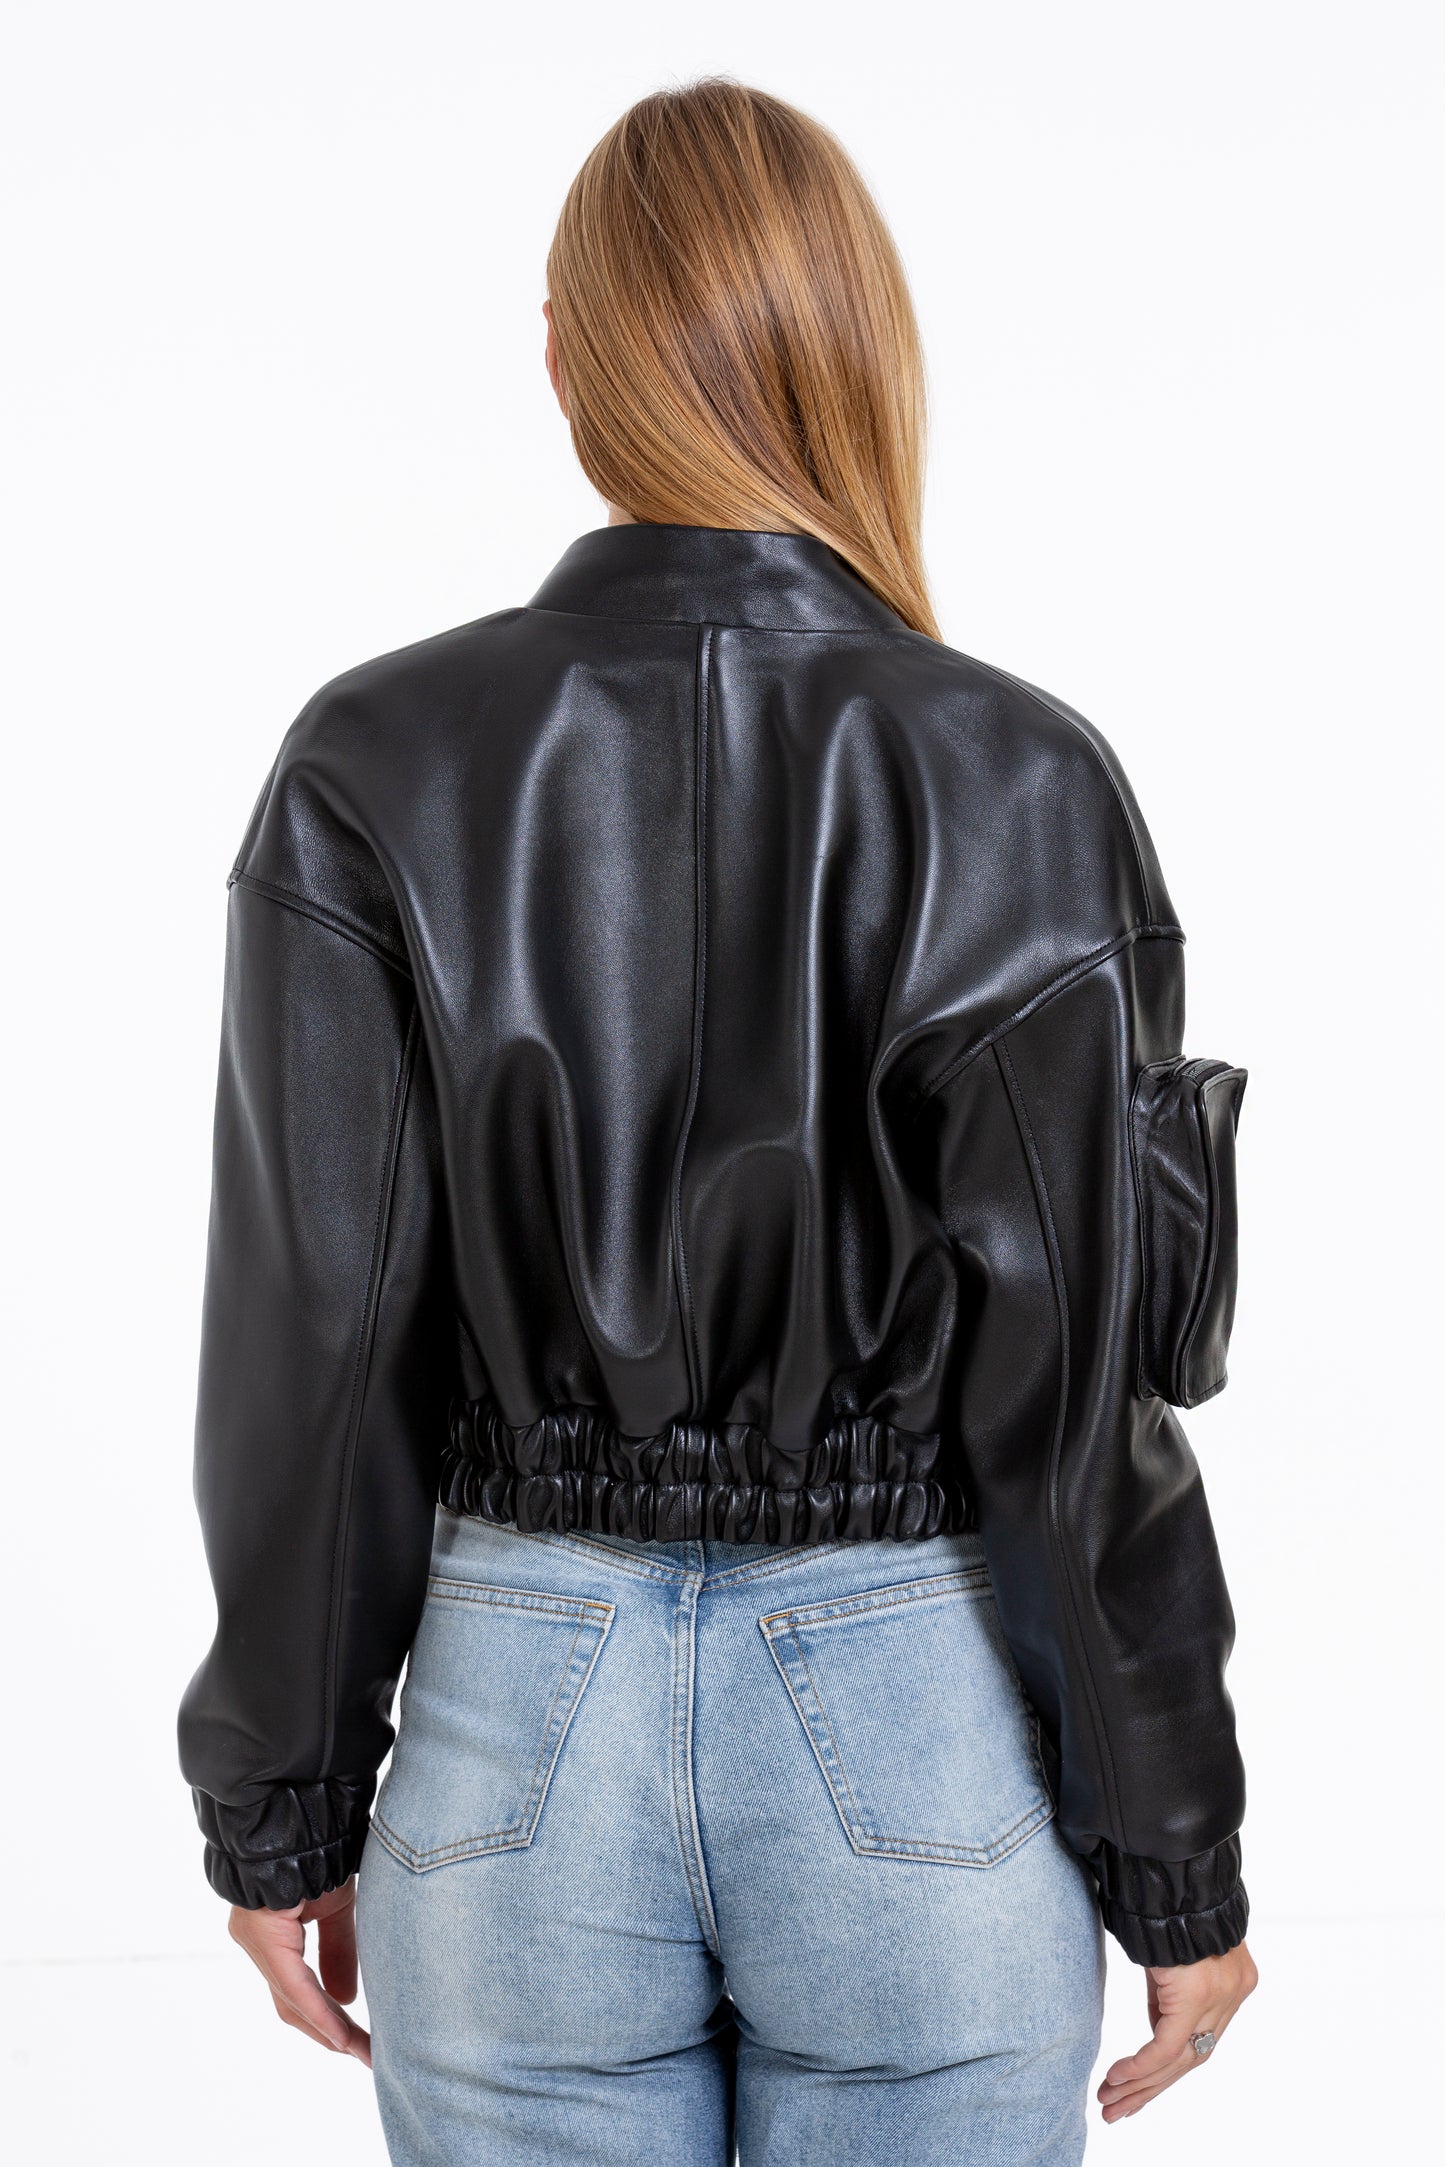 The Accra Women Leather Cropped Jacket